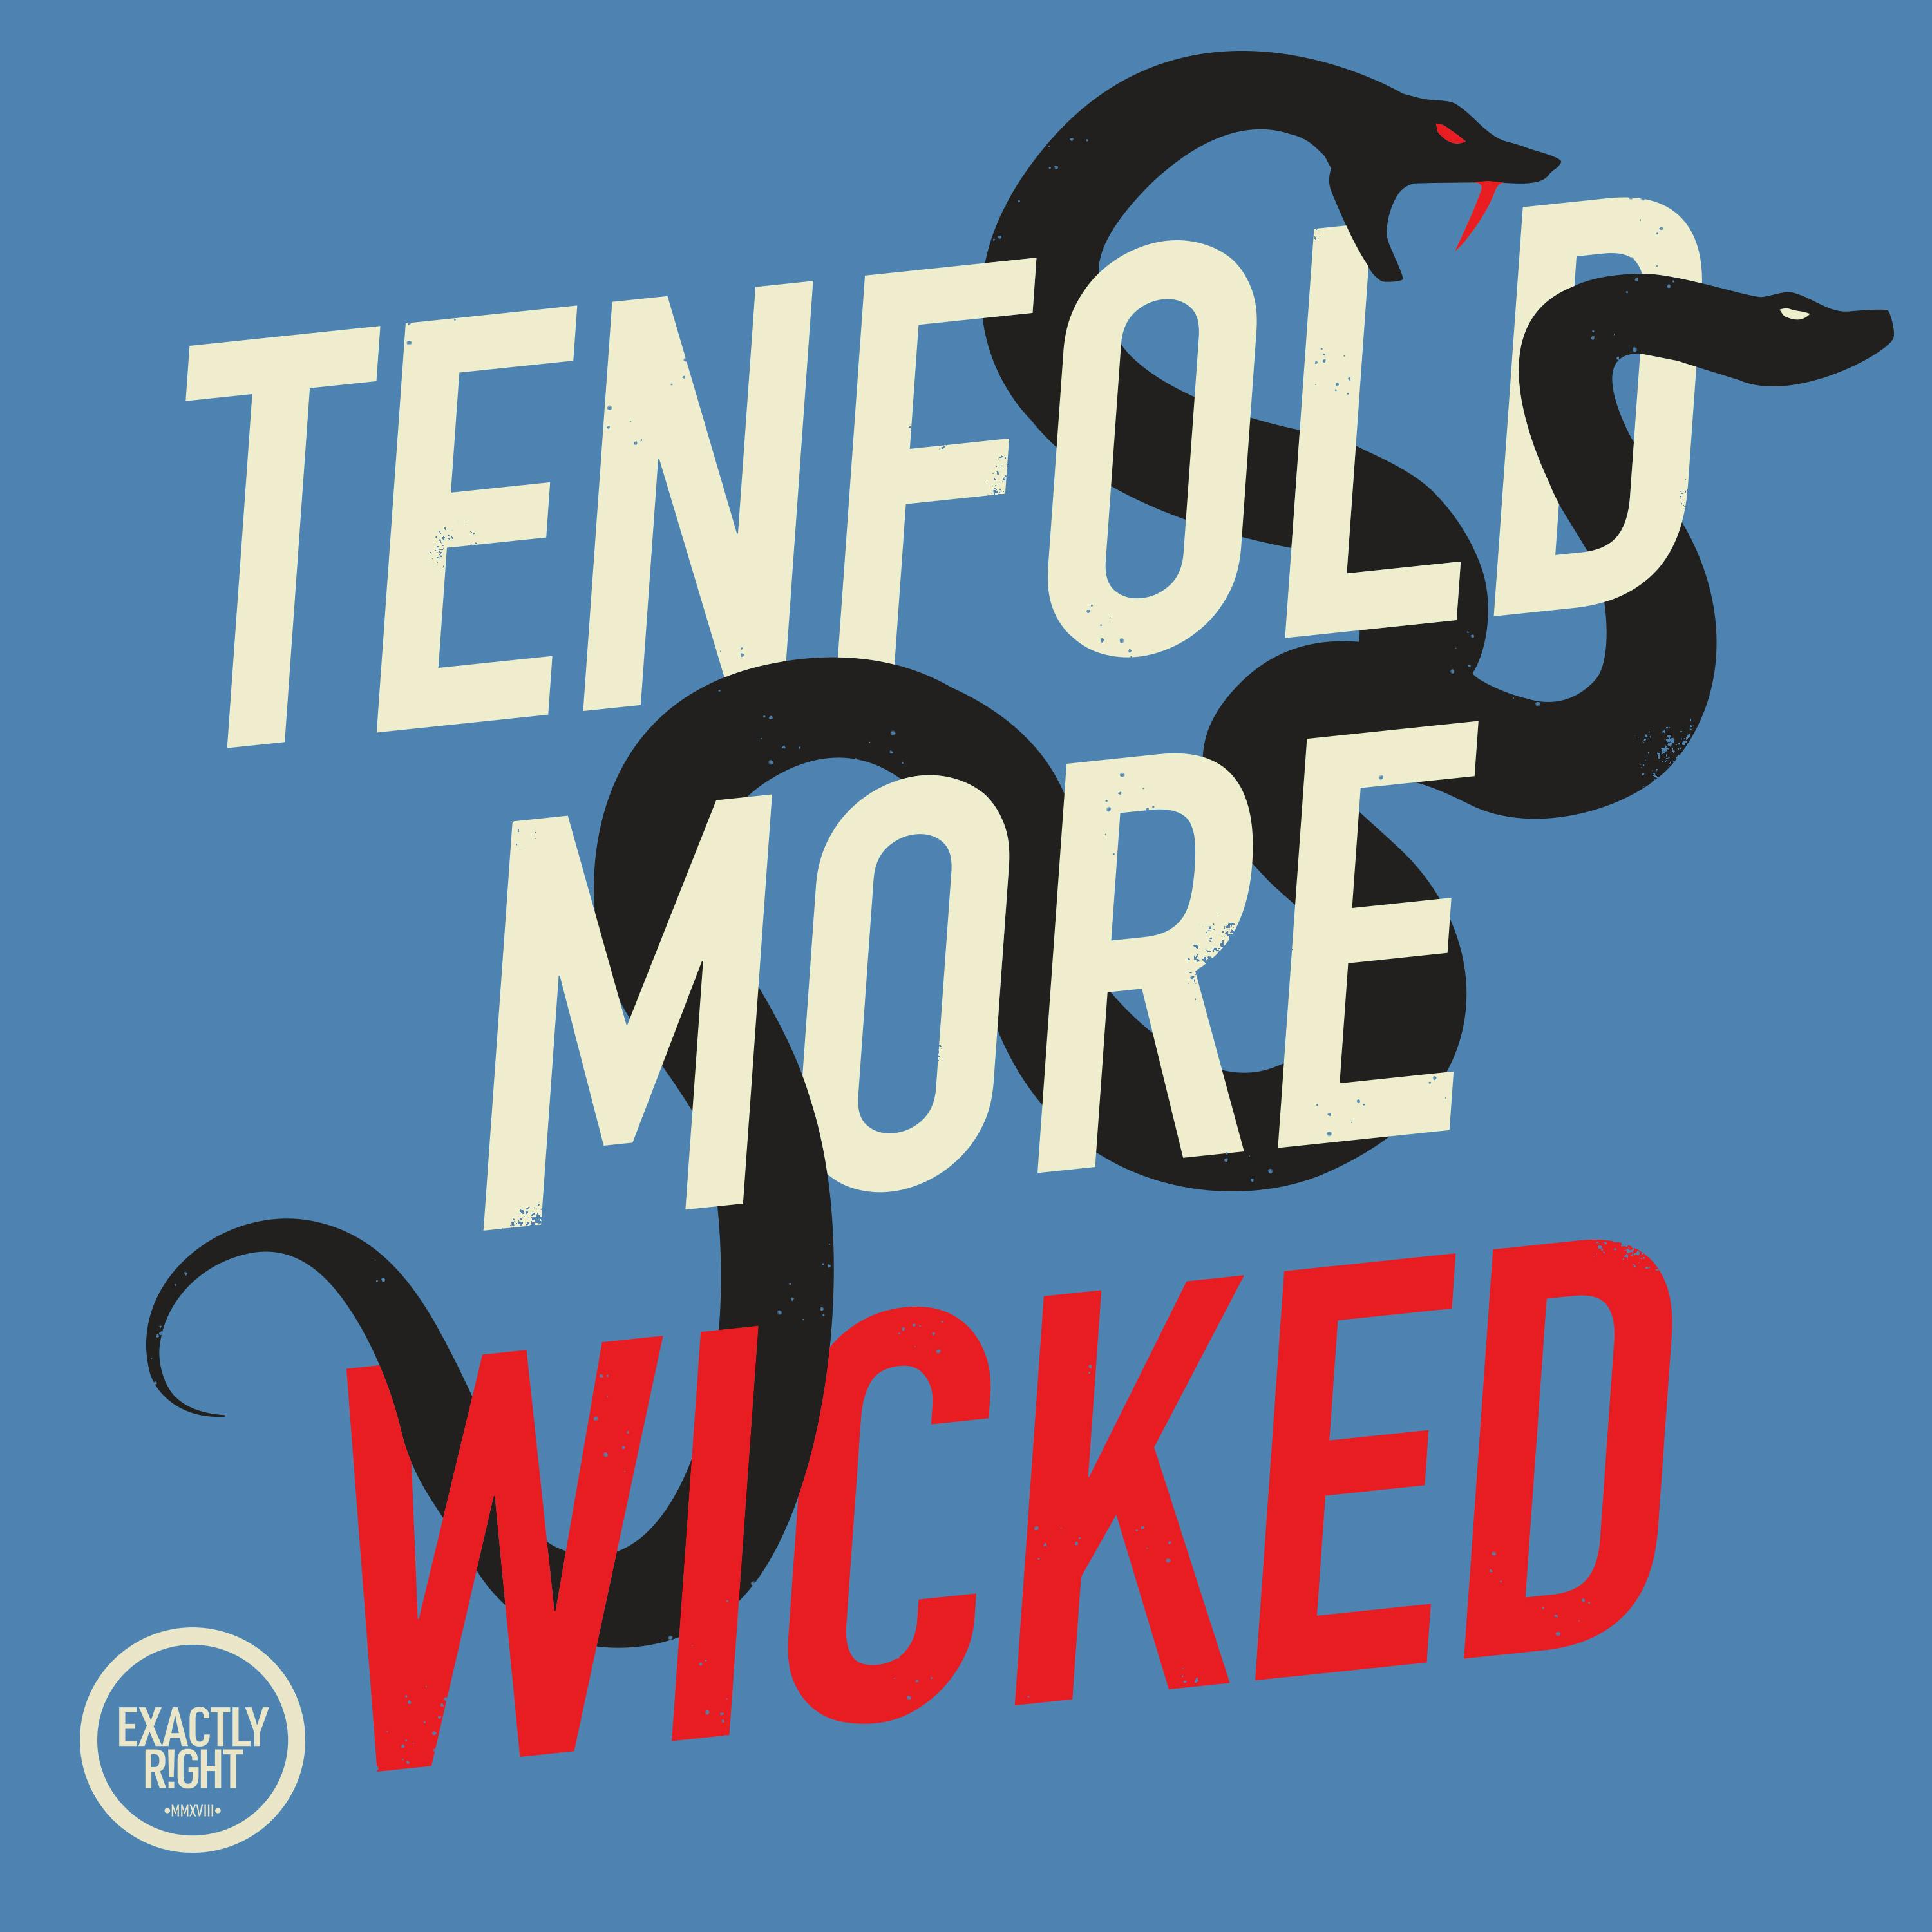 Tenfold More Wicked - Fire and Brimstone: Pioneers and Puritans